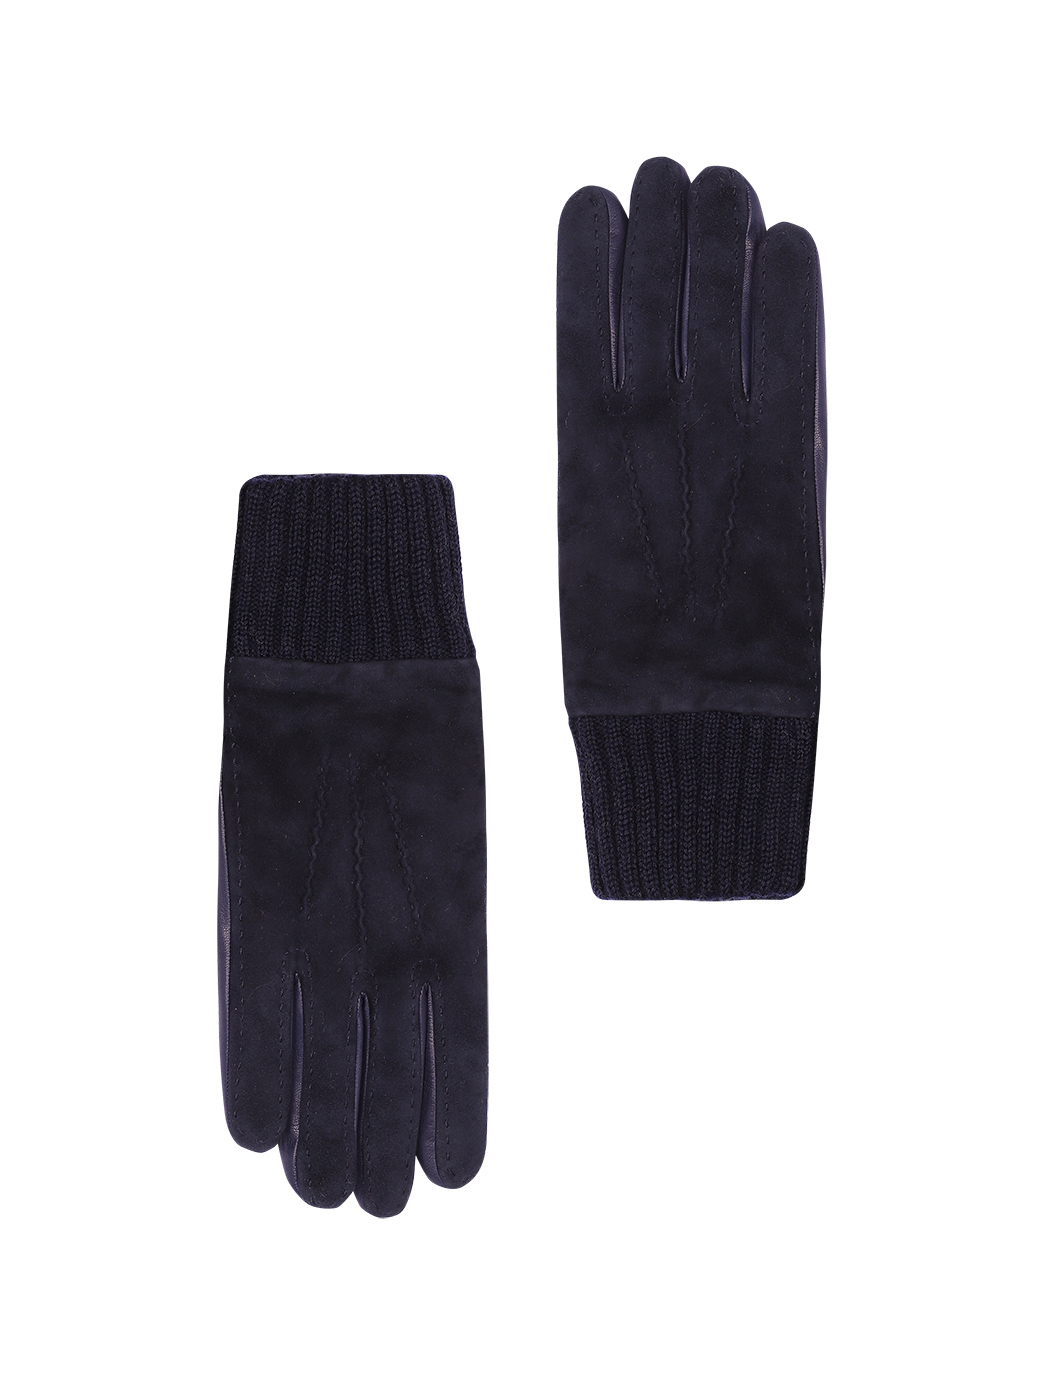 Men's Gloves in Suede with Knit Cuff Blue